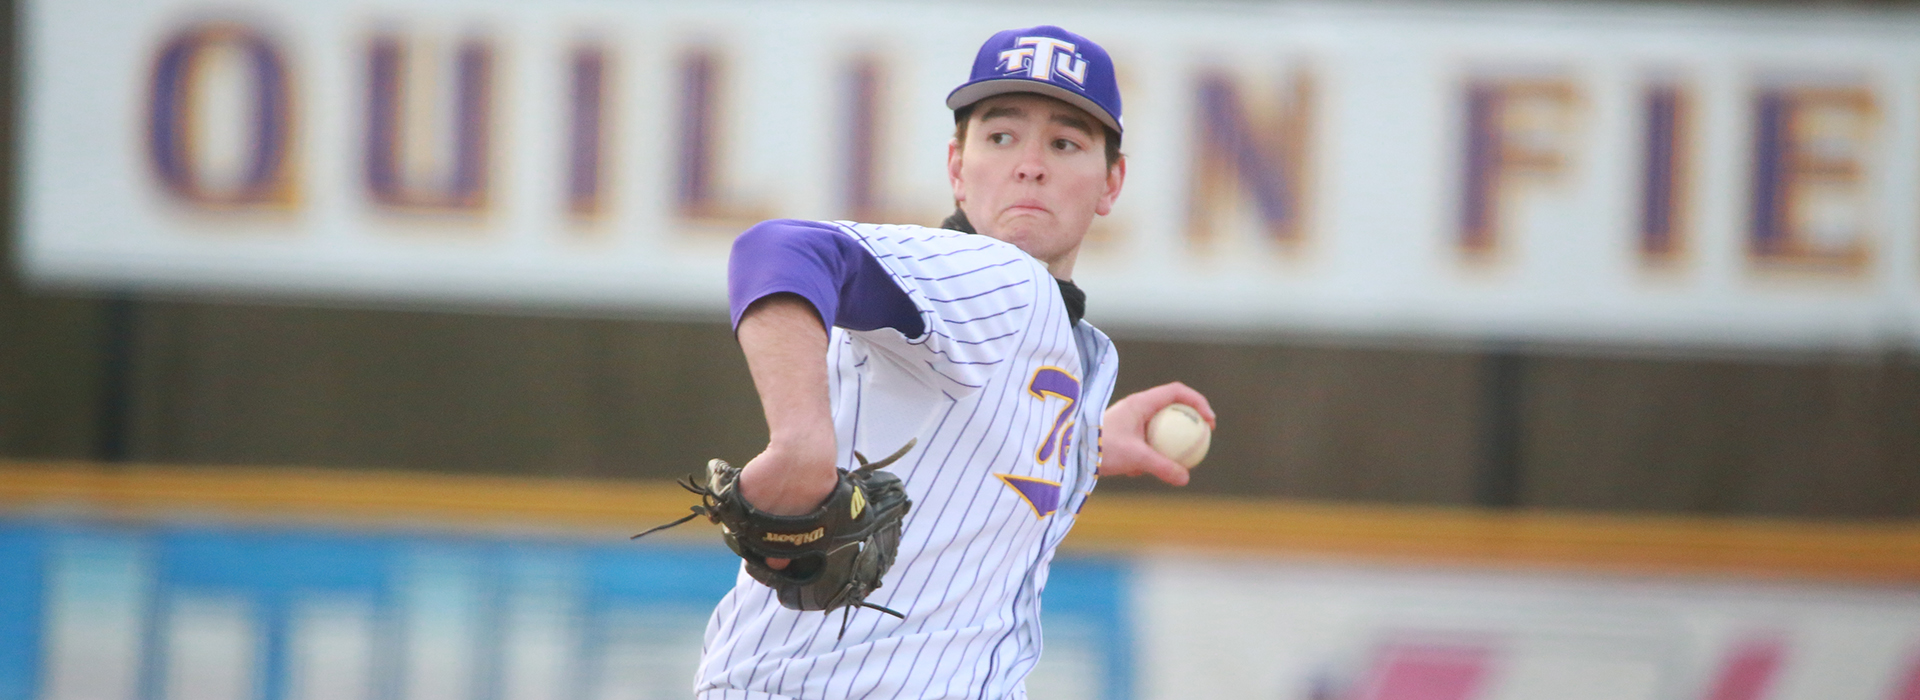 Pitching and patience at the plate push Golden Eagles past North Alabama